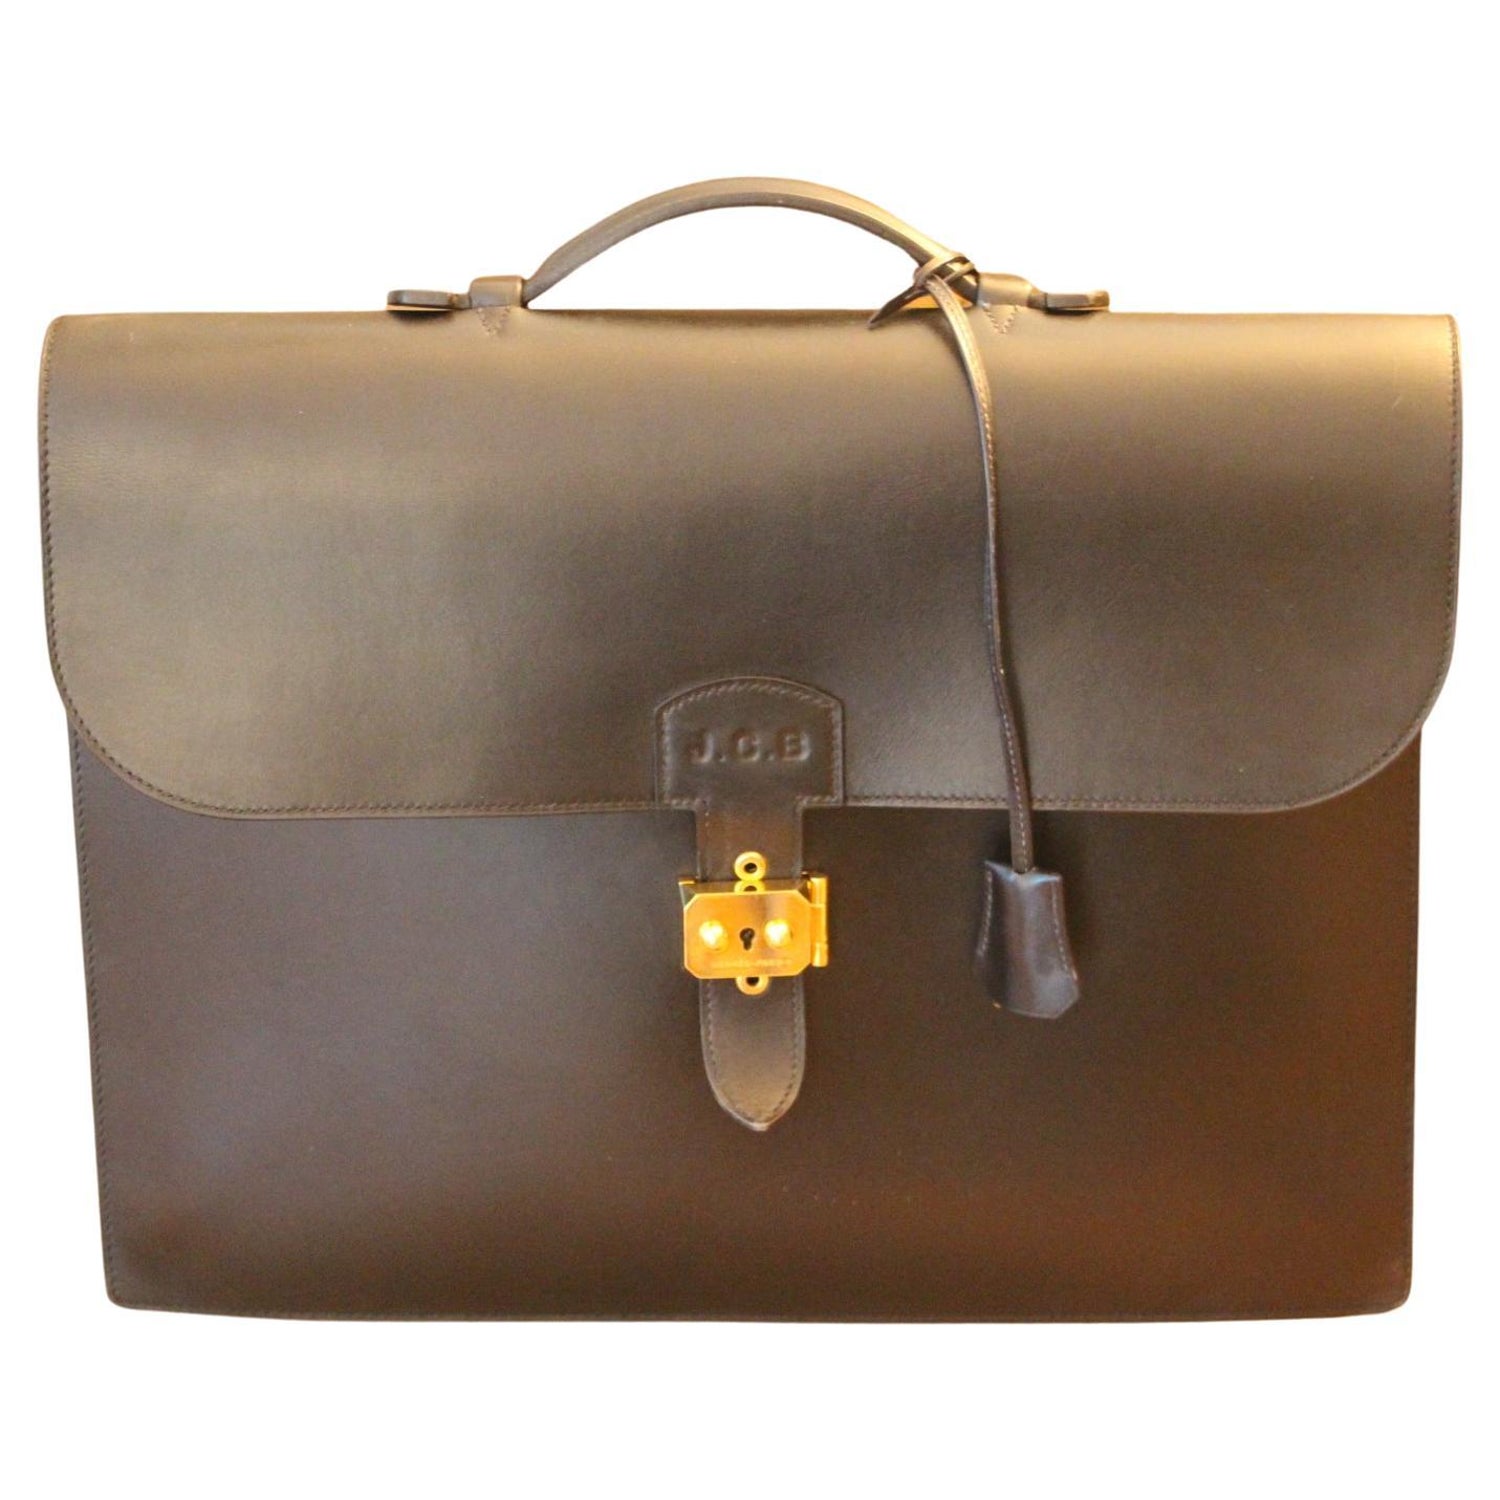 Monogram Doctors Briefcase from Louis Vuitton, 1990s for sale at